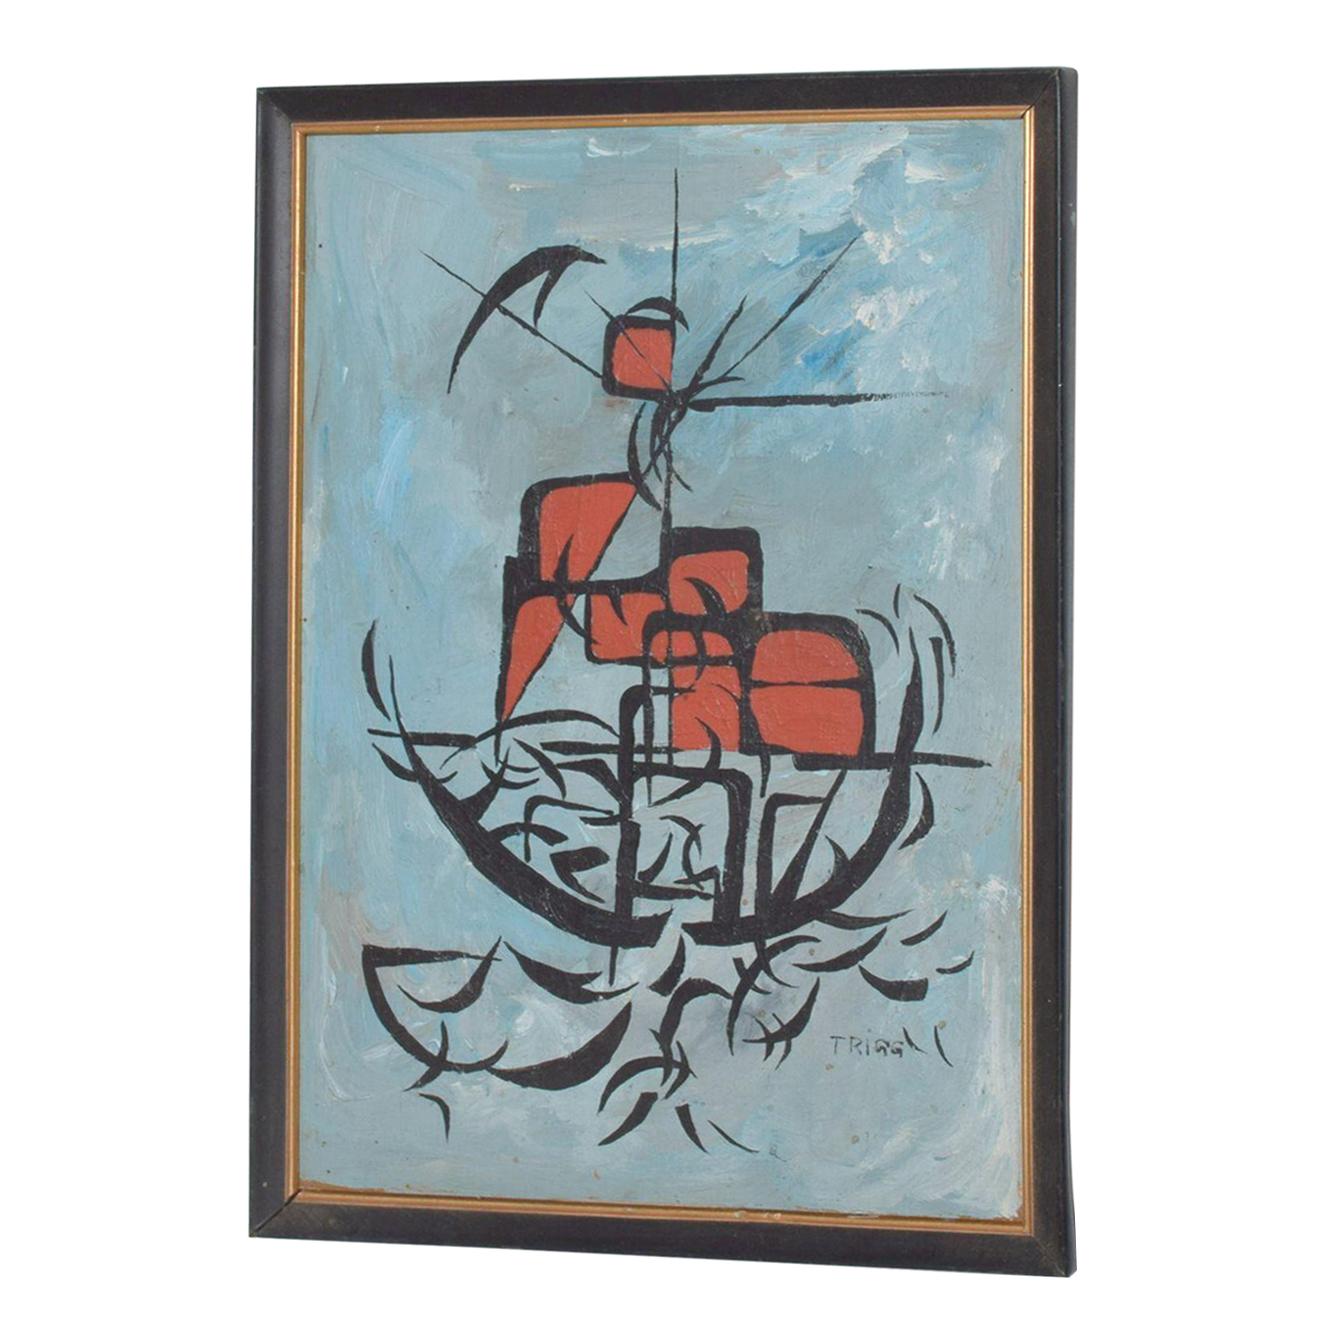 1965 Abstract Art Midcentury Modernist Boat Oil Painting